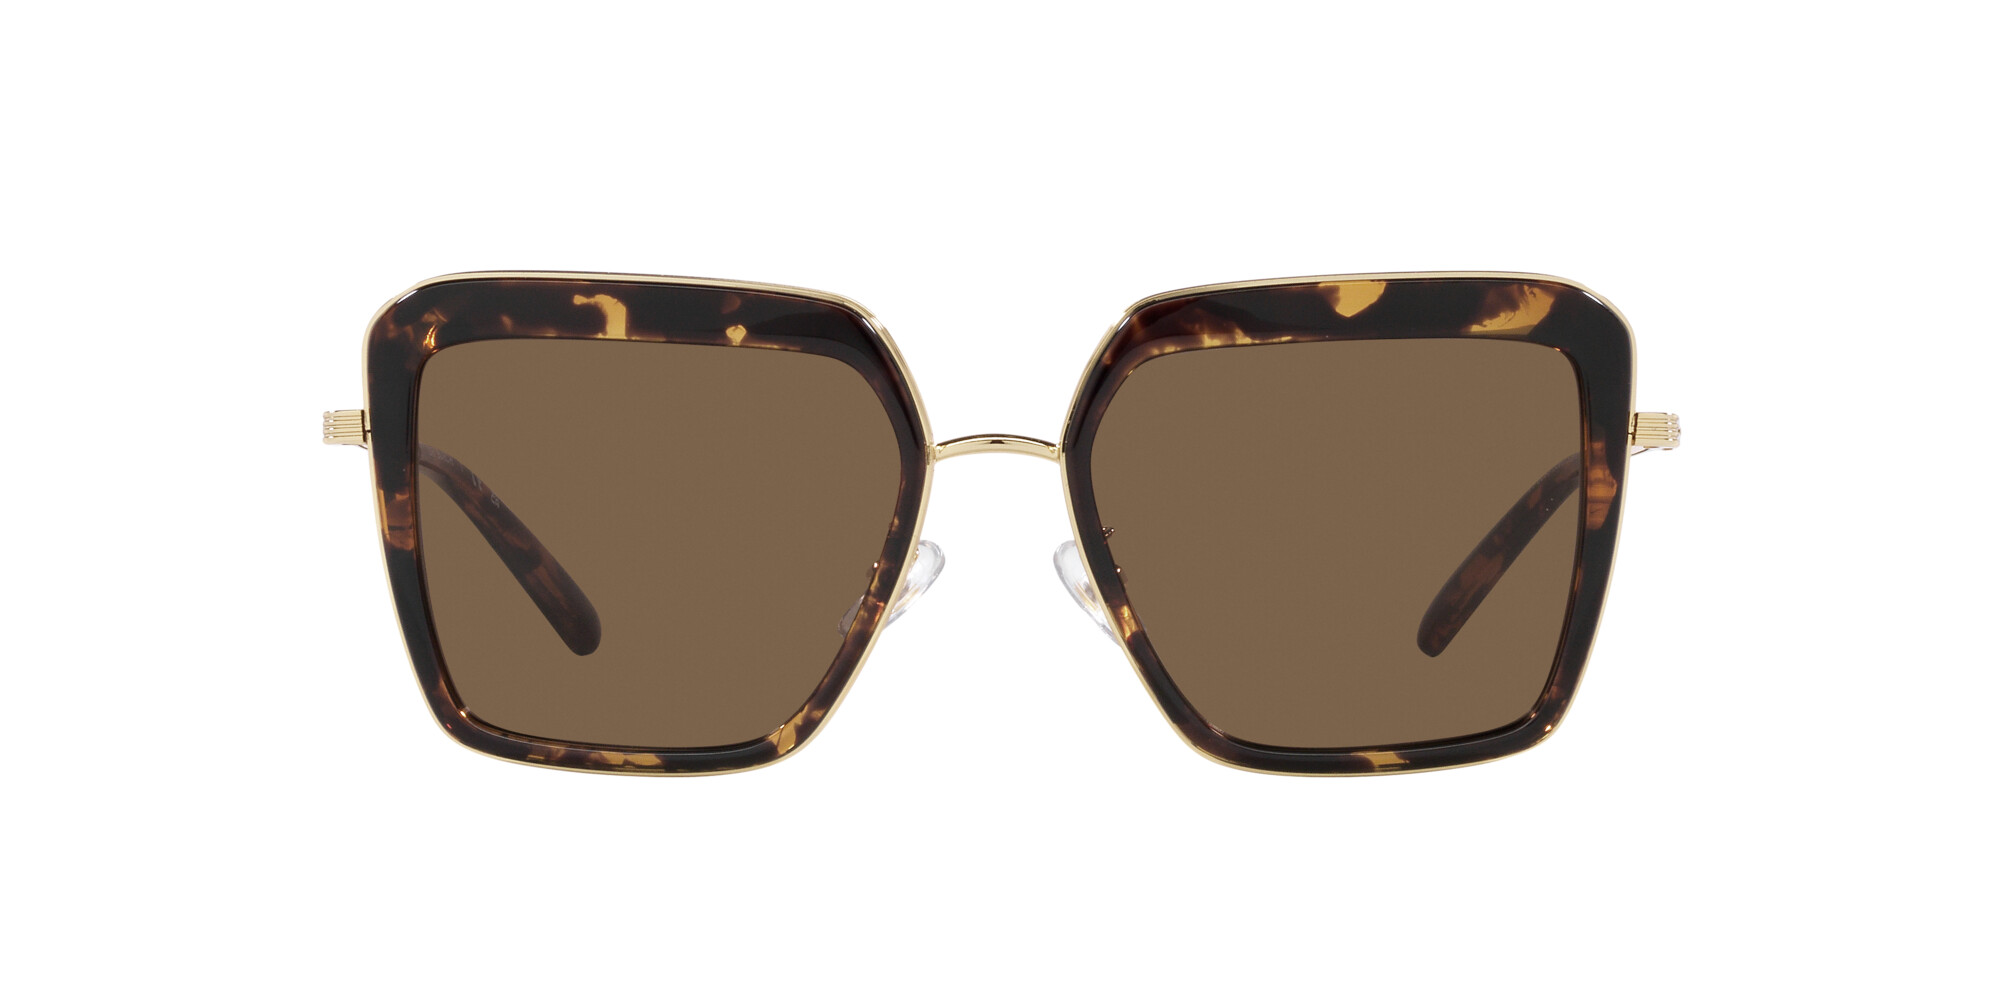 [products.image.front] Tory Burch 0TY6099 336373 Sonnenbrille